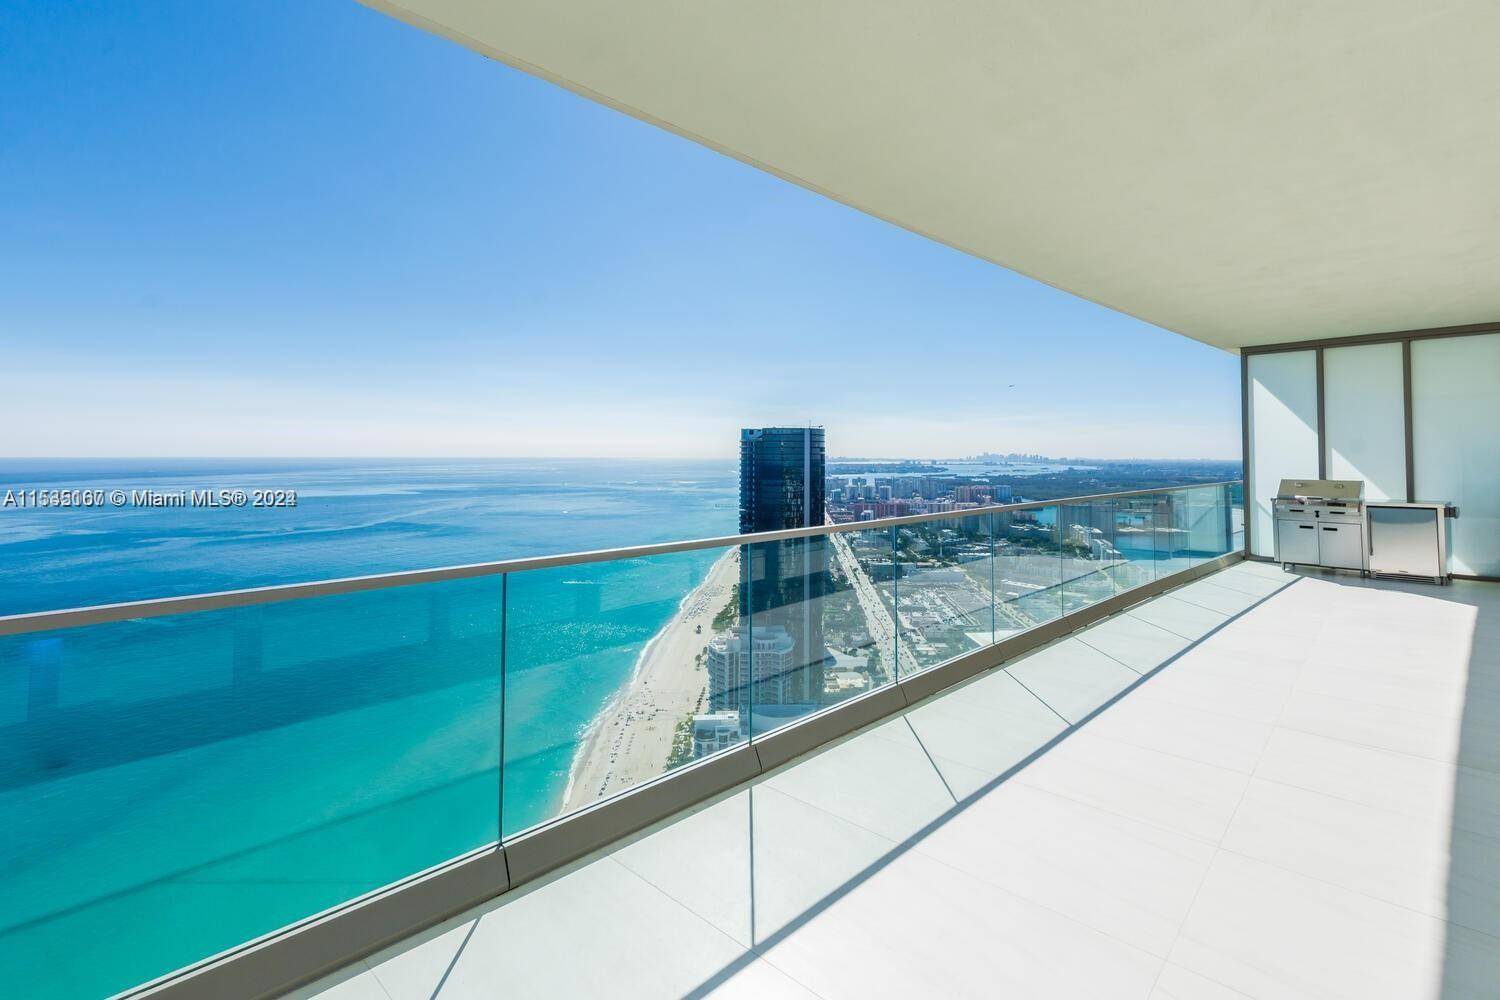 Spectacular Lower PH in Armani leaves you breathless with these stunning views from the Coastline to Captivating views of skyline w incredible sunset views.